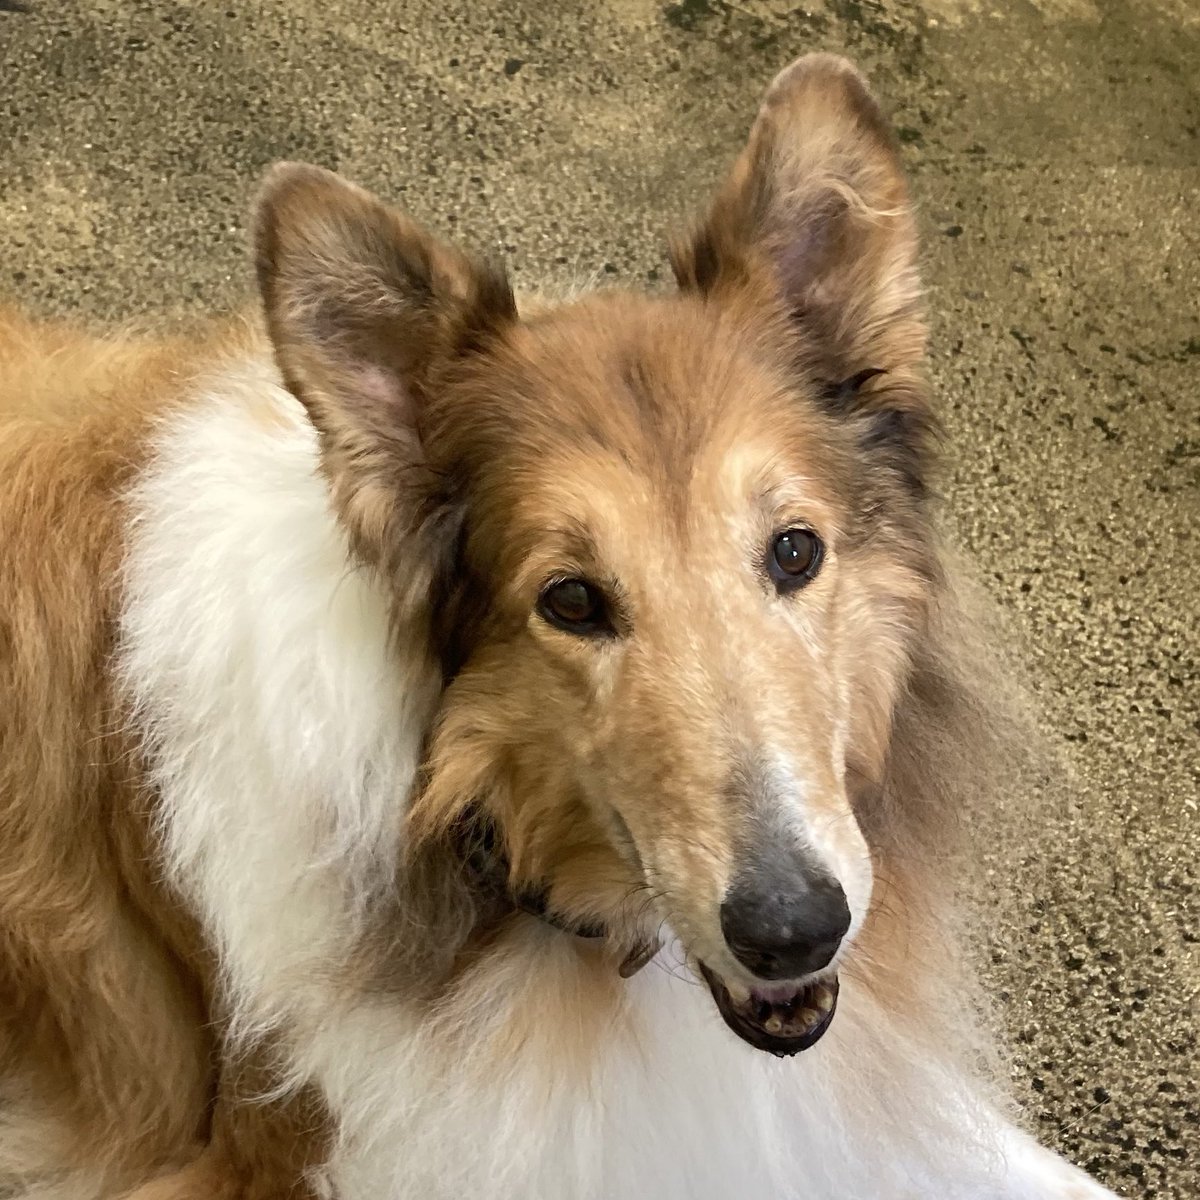 My various facial 🙃😛😊😁 expressions while waiting for the vet. See, it wasn’t so bad being at the vet. 

#vetvisit #vetclinic #roughday #roughcollie #collie #seniordog